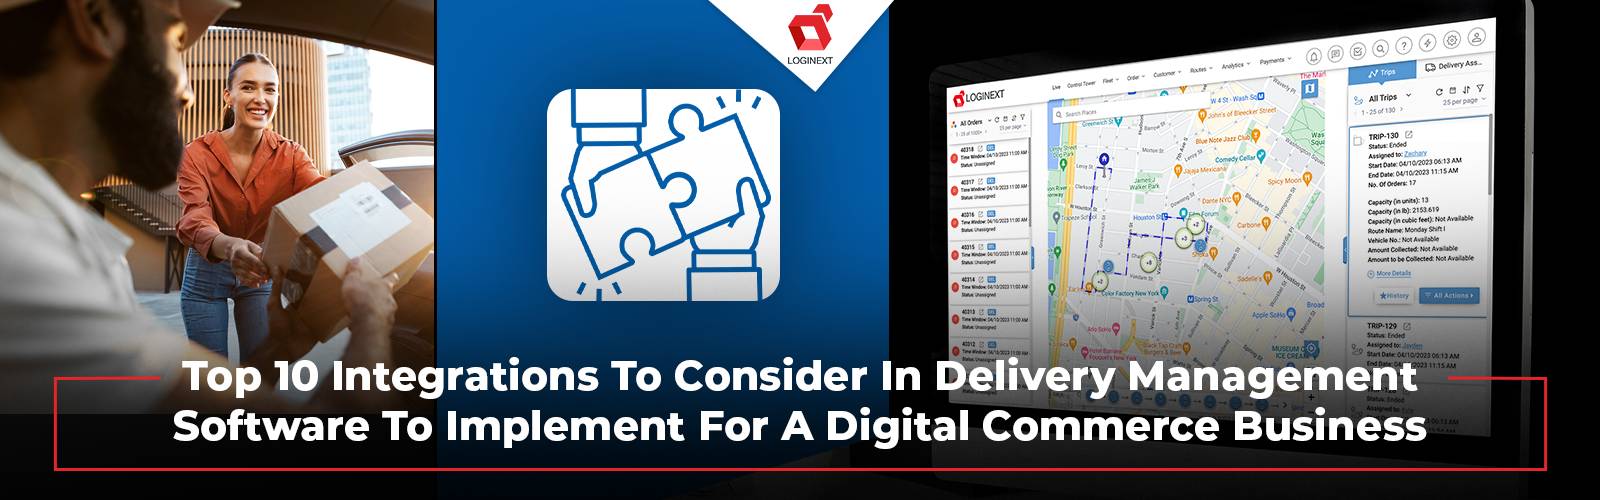 Top 10 integrations in Delivery Management Software For Digital Commerce